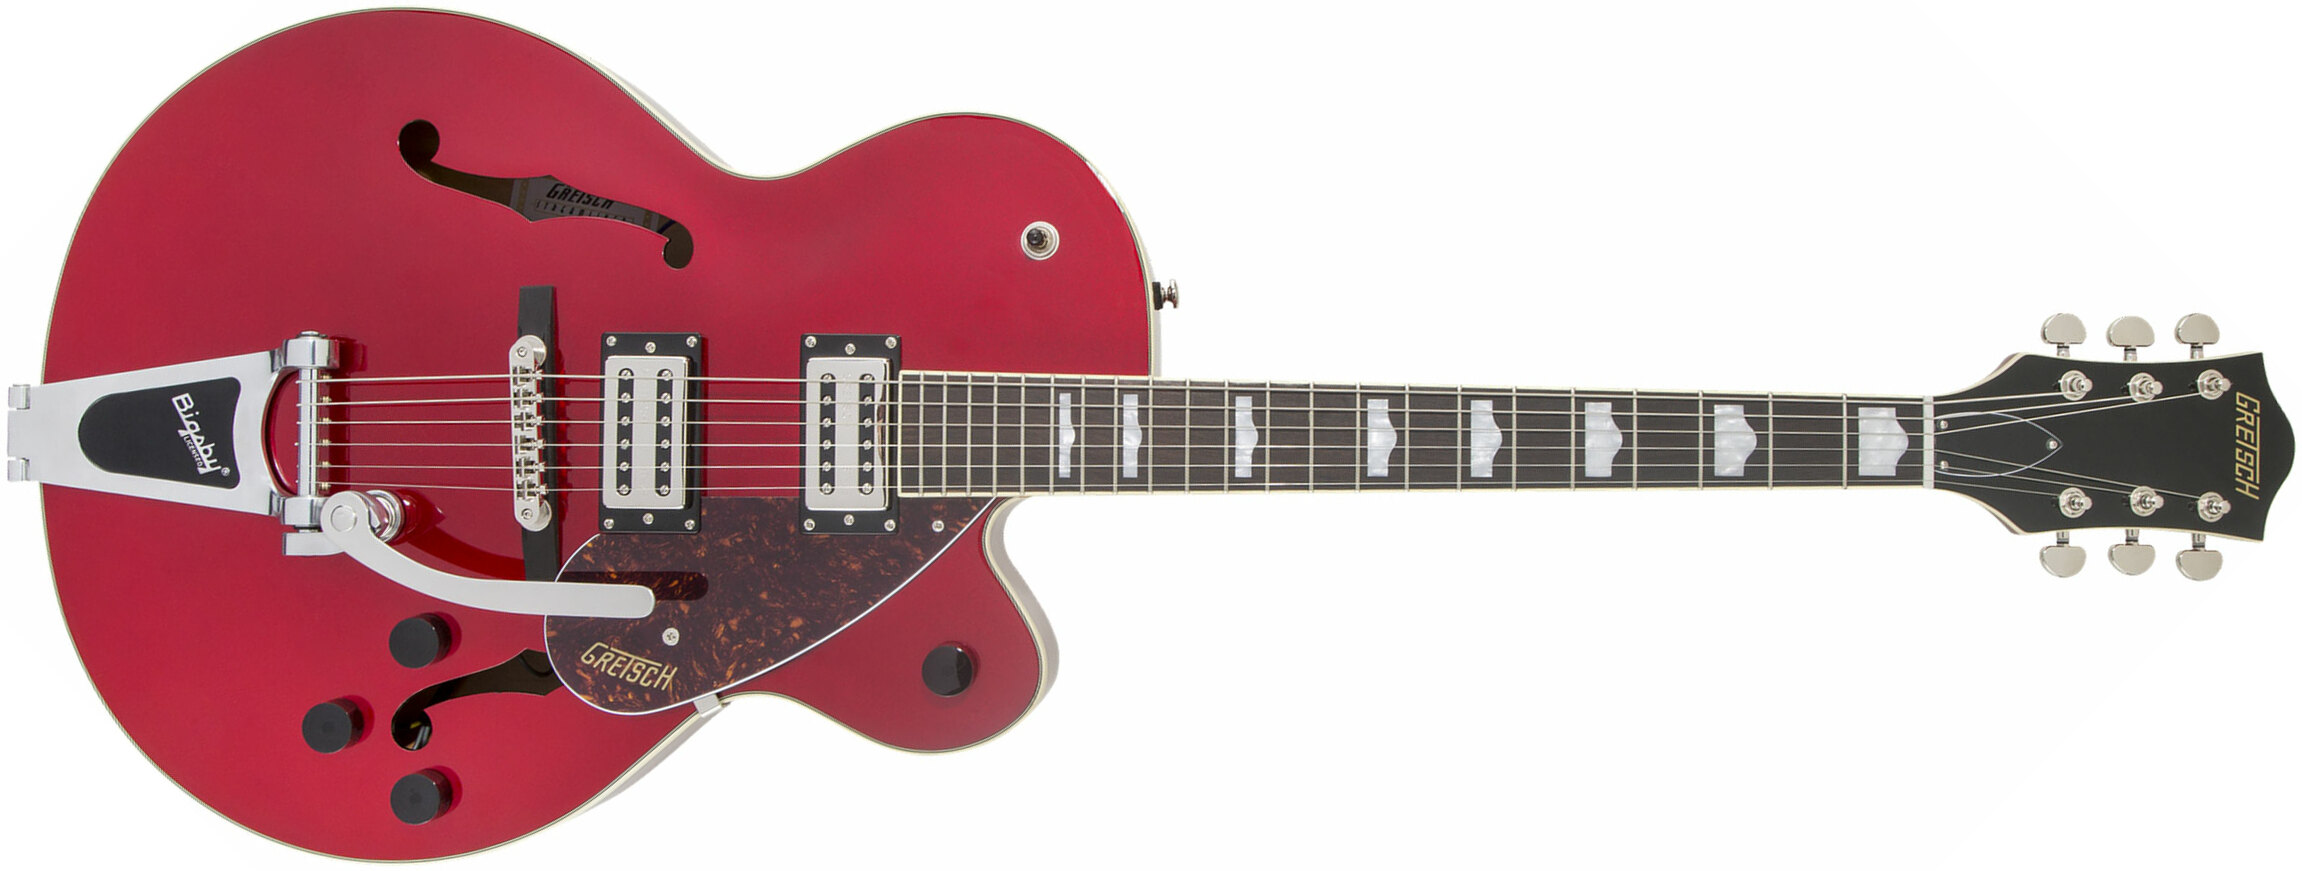 Gretsch G2420t Streamliner Hollow Body Bigsby Hh Trem Lau - Candy Apple Red - Semi-hollow electric guitar - Main picture